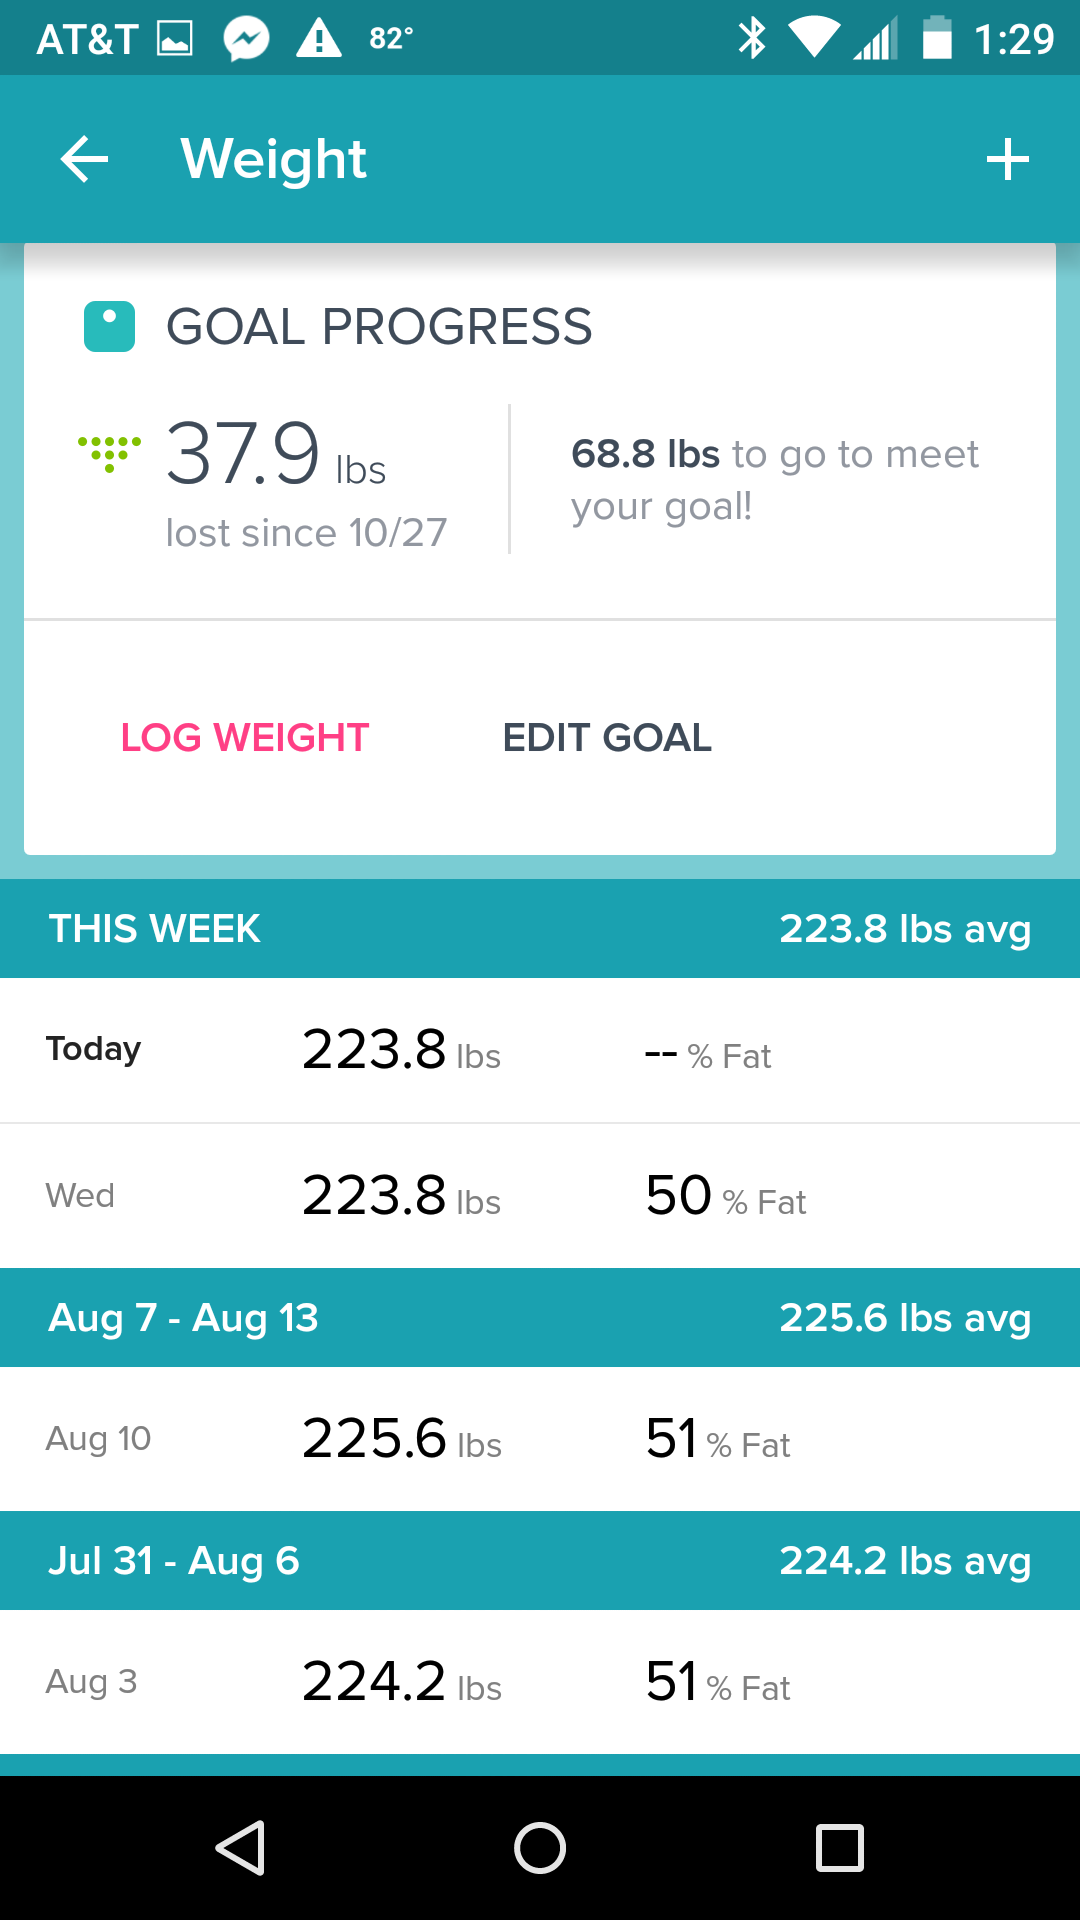 weight after syncing with MyFitnessPal